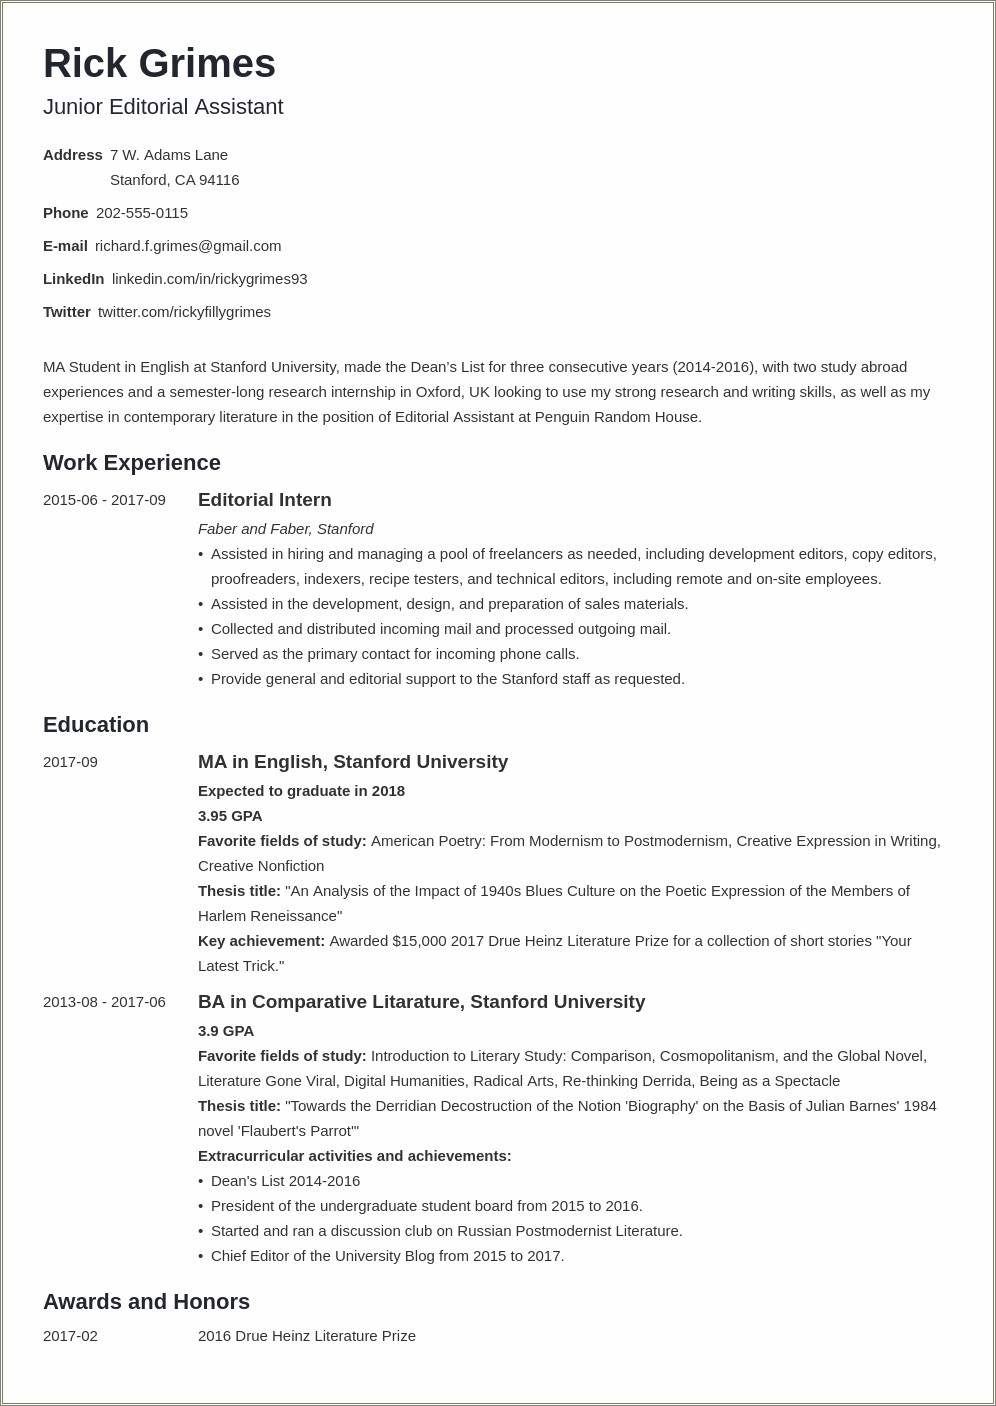 Entry Level Business Resume Skills Examples